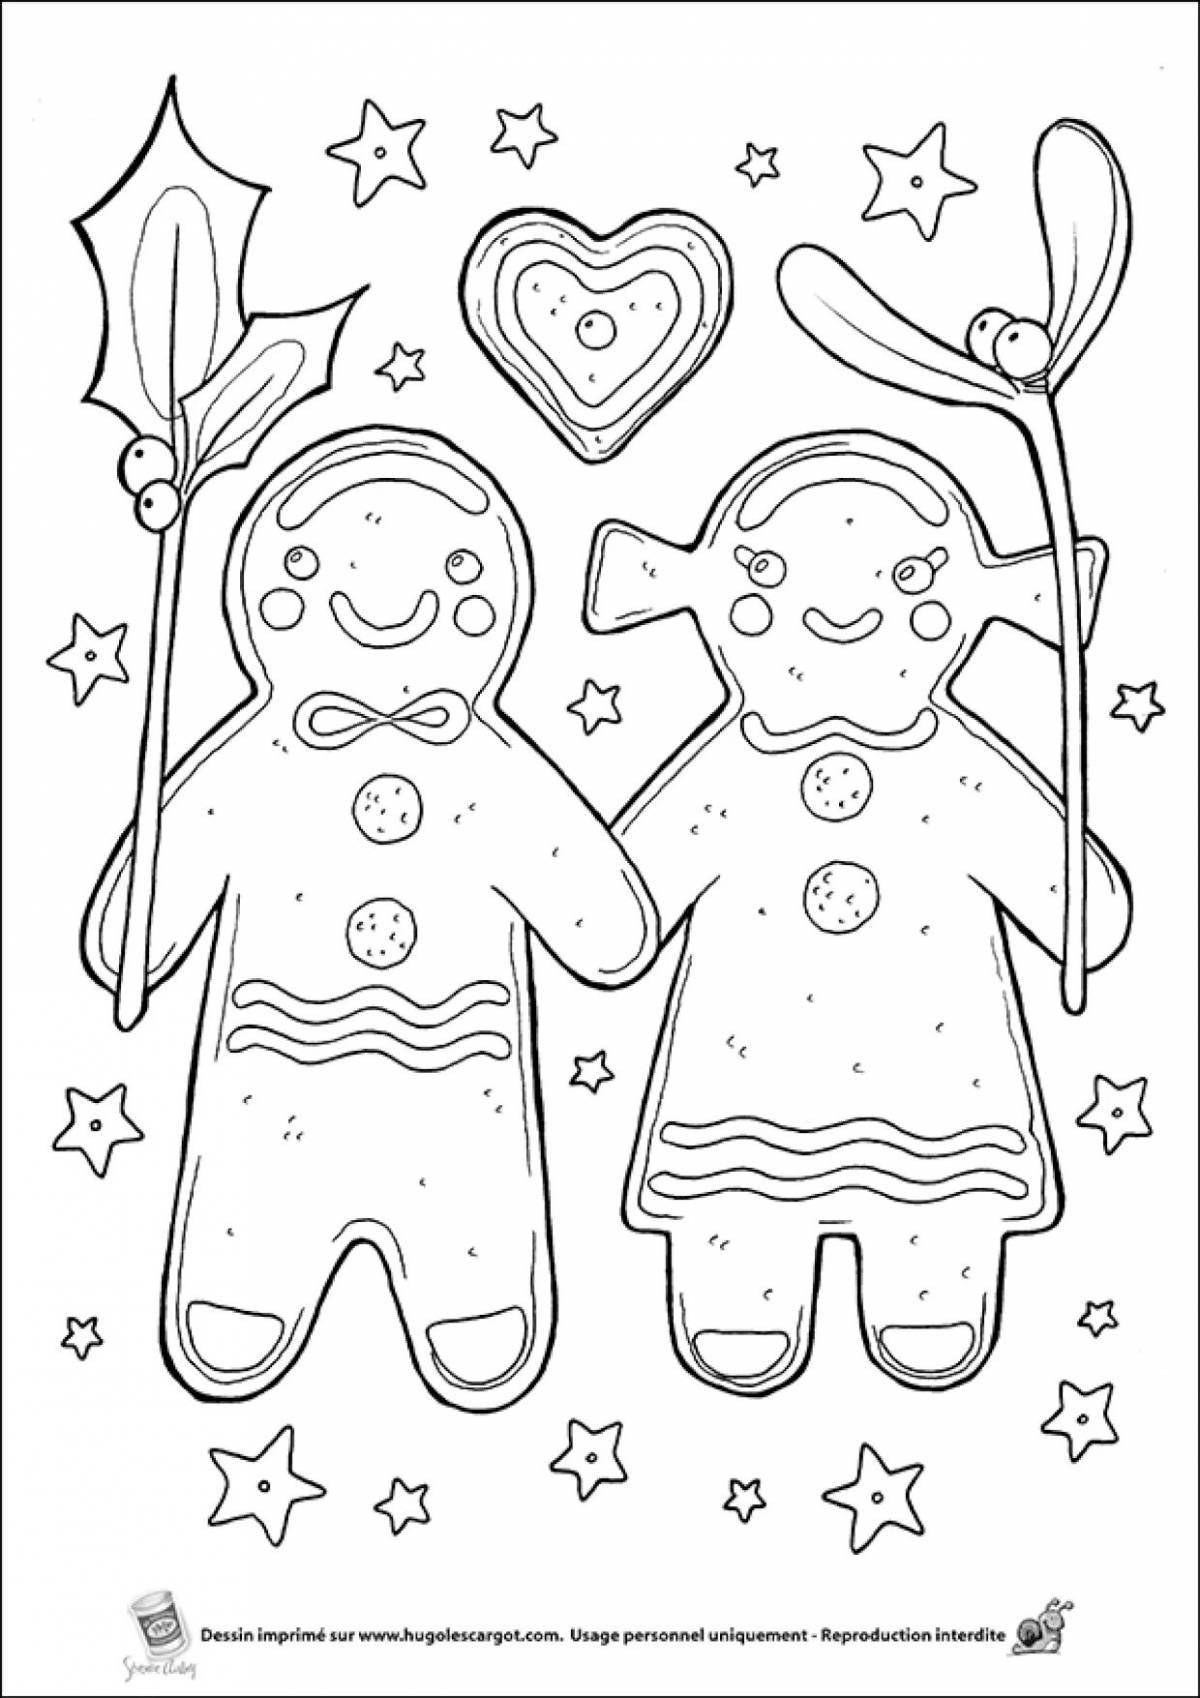 Coloring book with colorful gingerbread